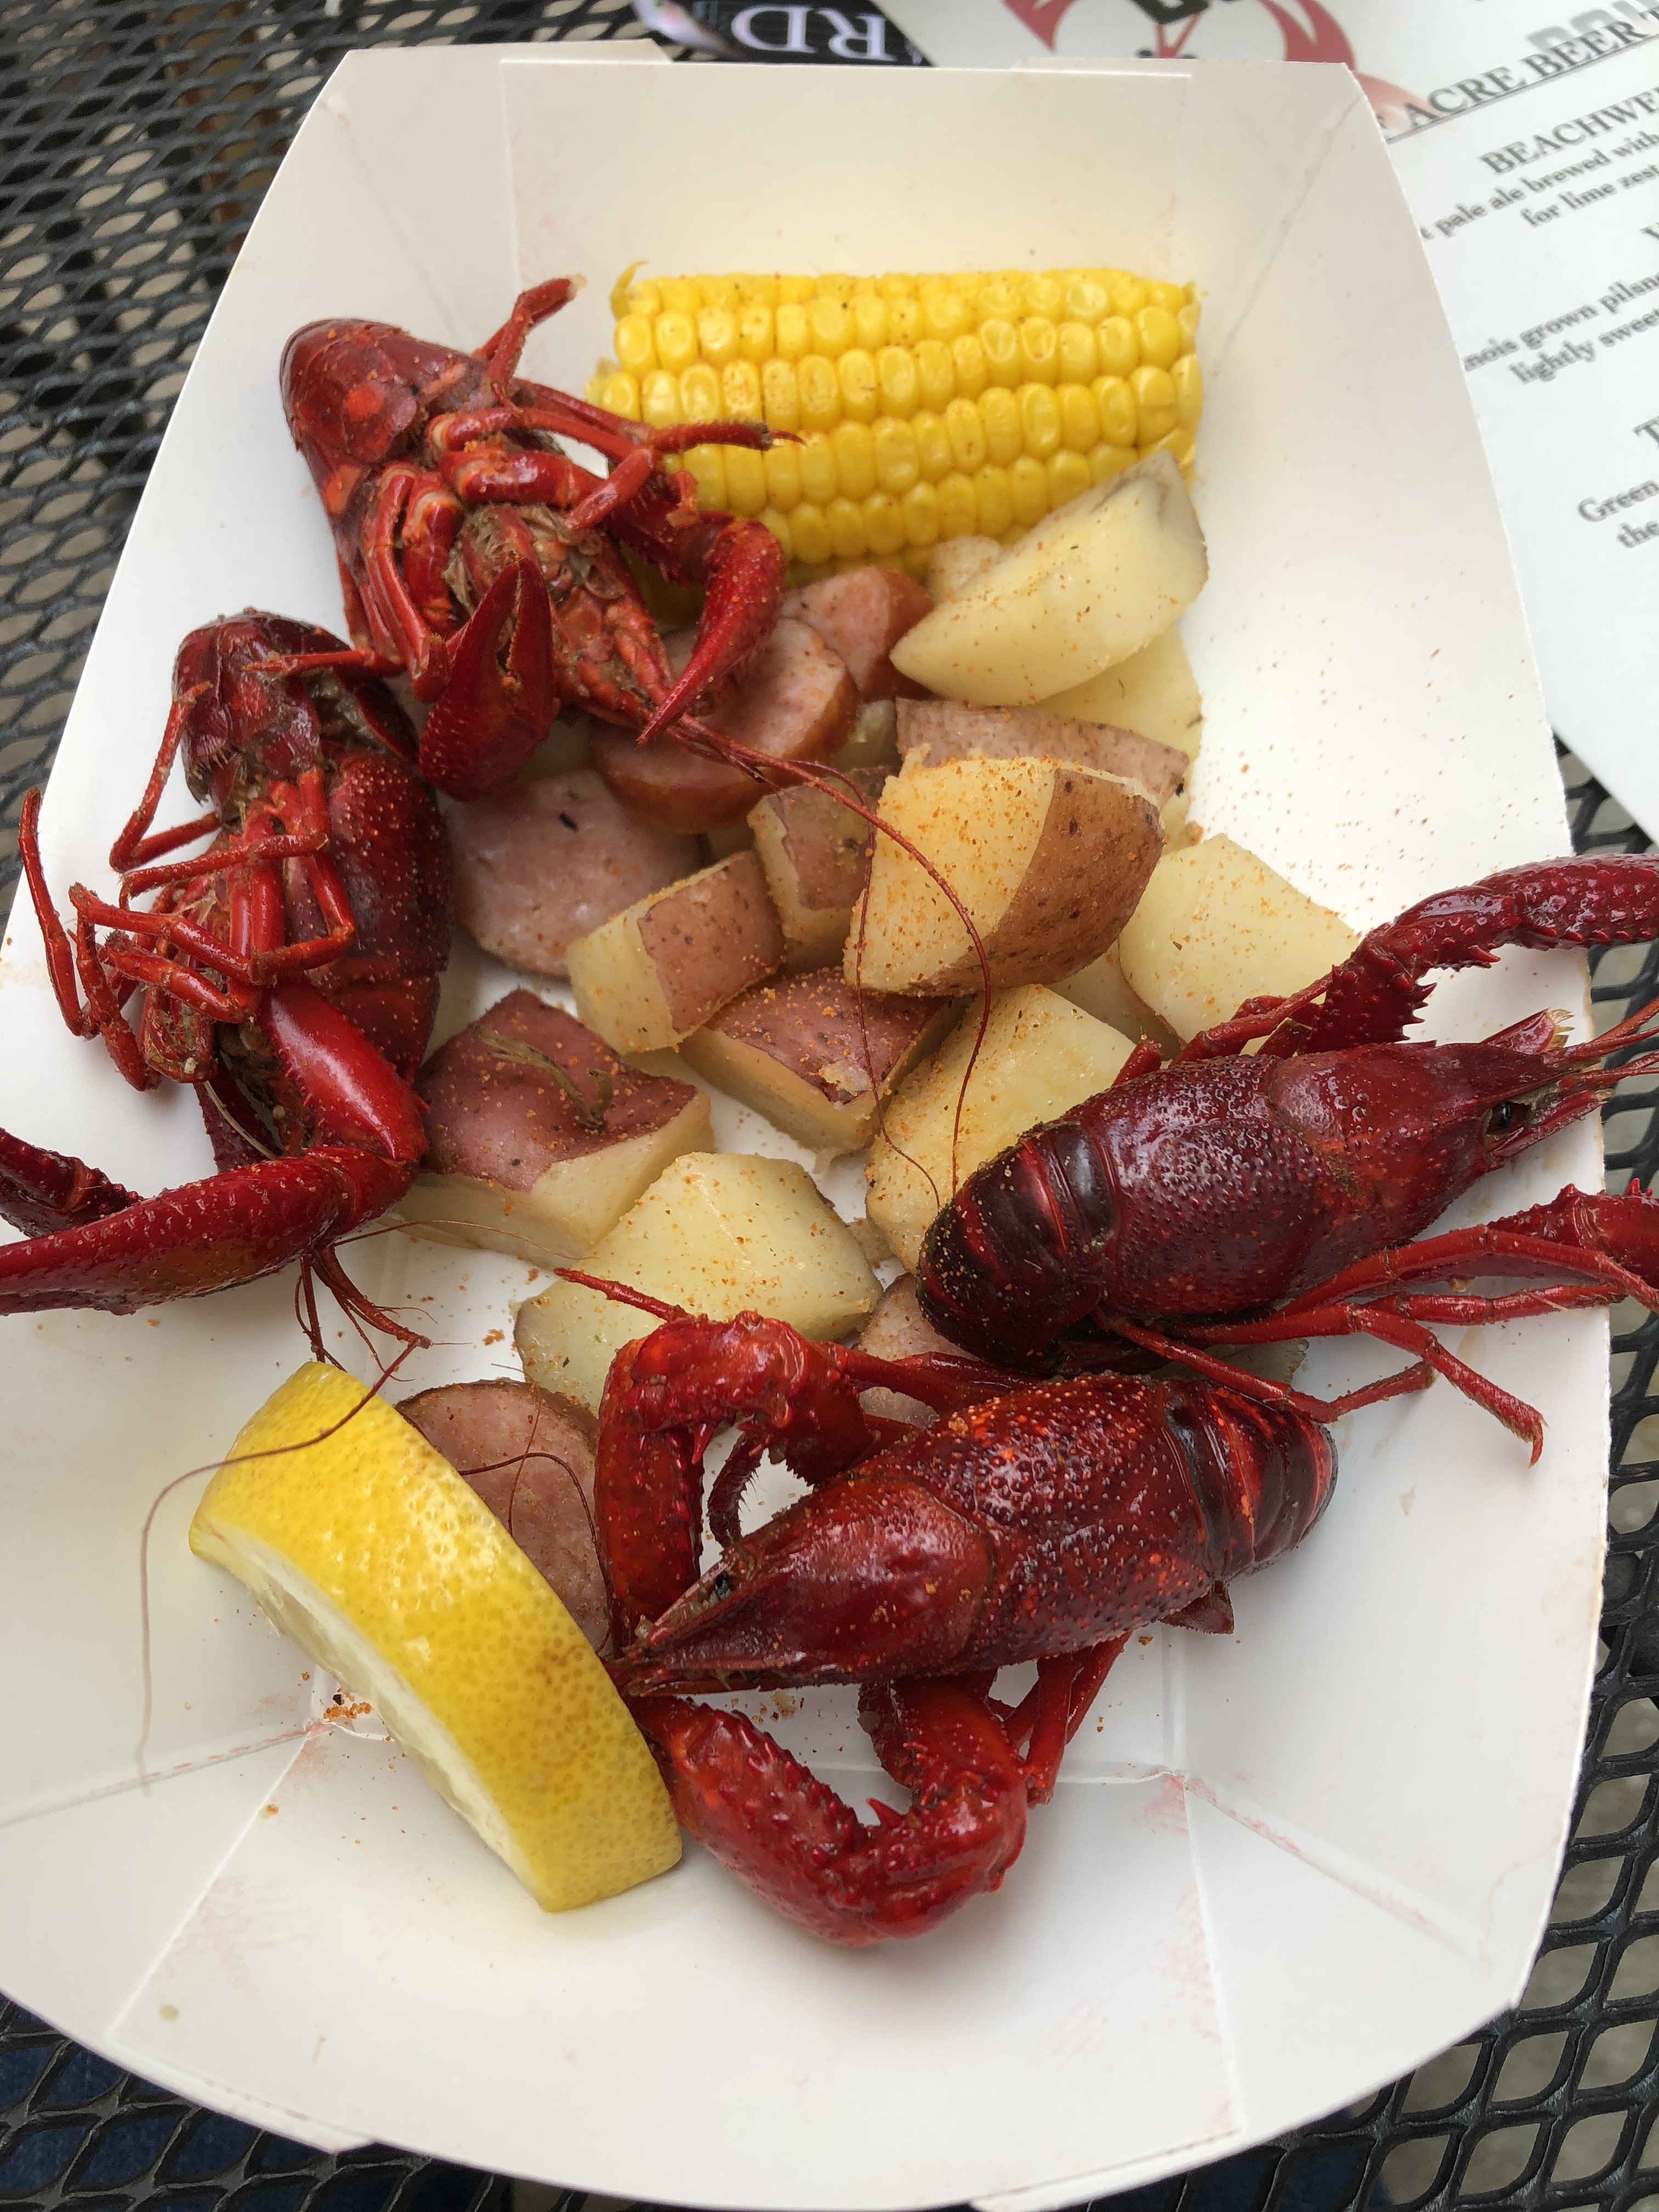 Crane Alley’s Crawfish Boil 2019, in review